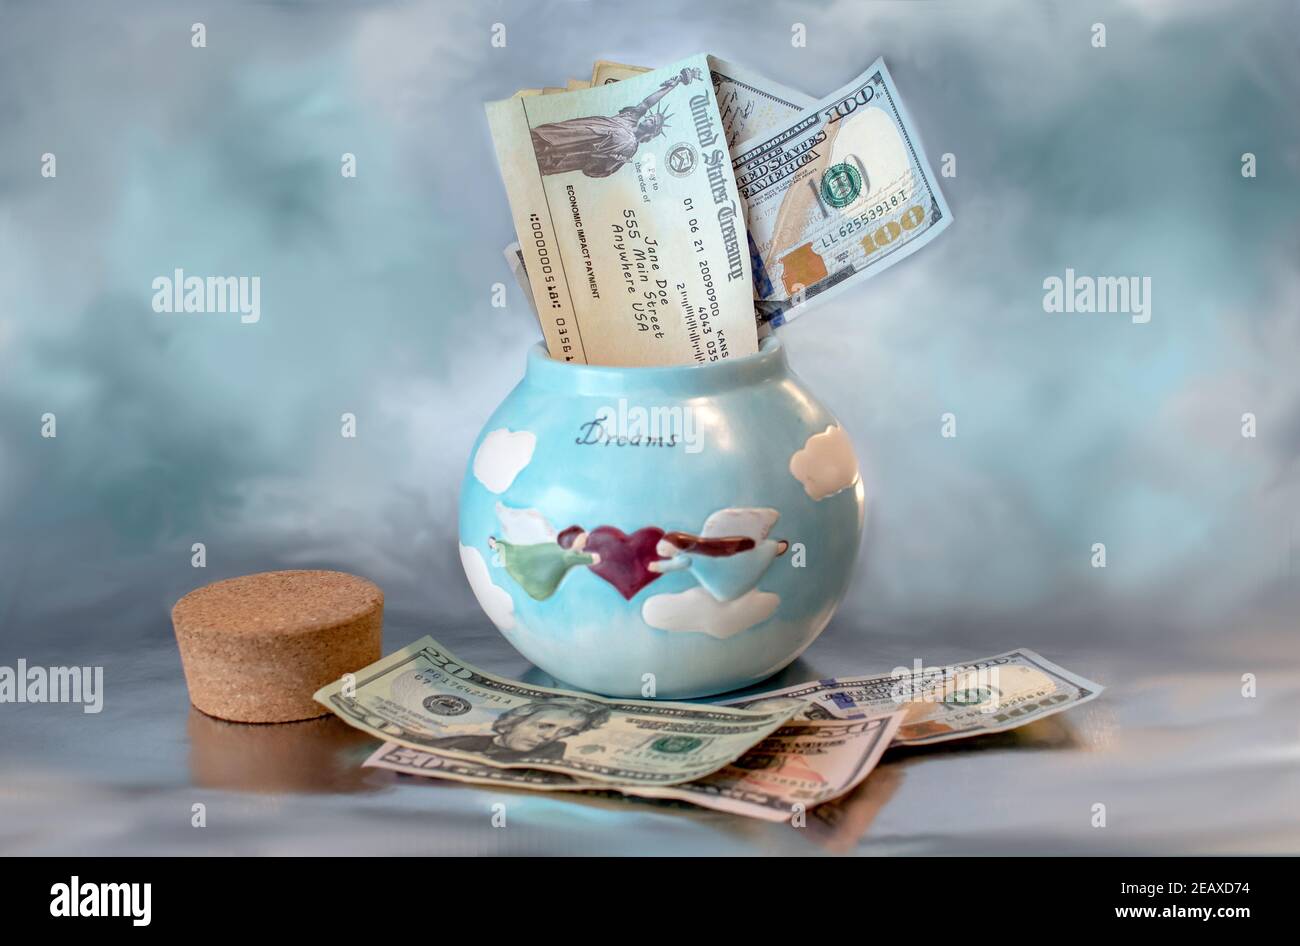 A dream jar, usually filled with extra cash for something one dreams of like a vacation or new car, is now needed for food and survival and the econom Stock Photo